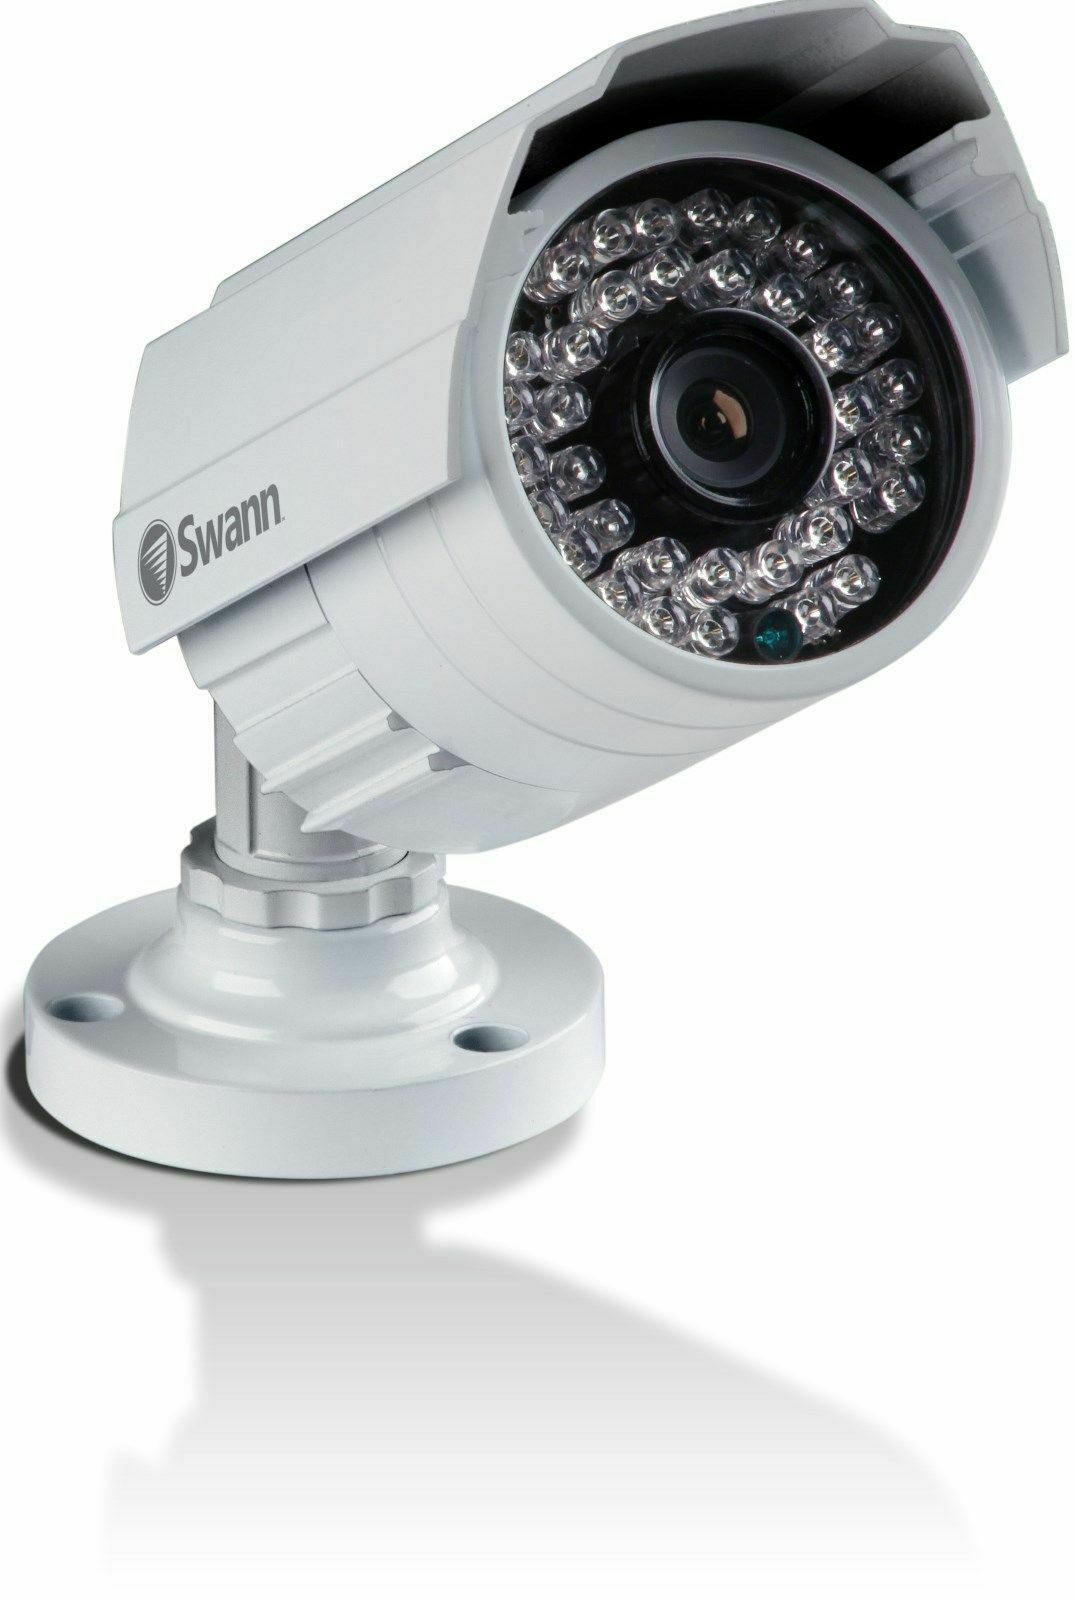 Primary image for Swann pro 642 COCAM-BUL900900TVL SWPRO-642CAM-US Night vision Security Camera